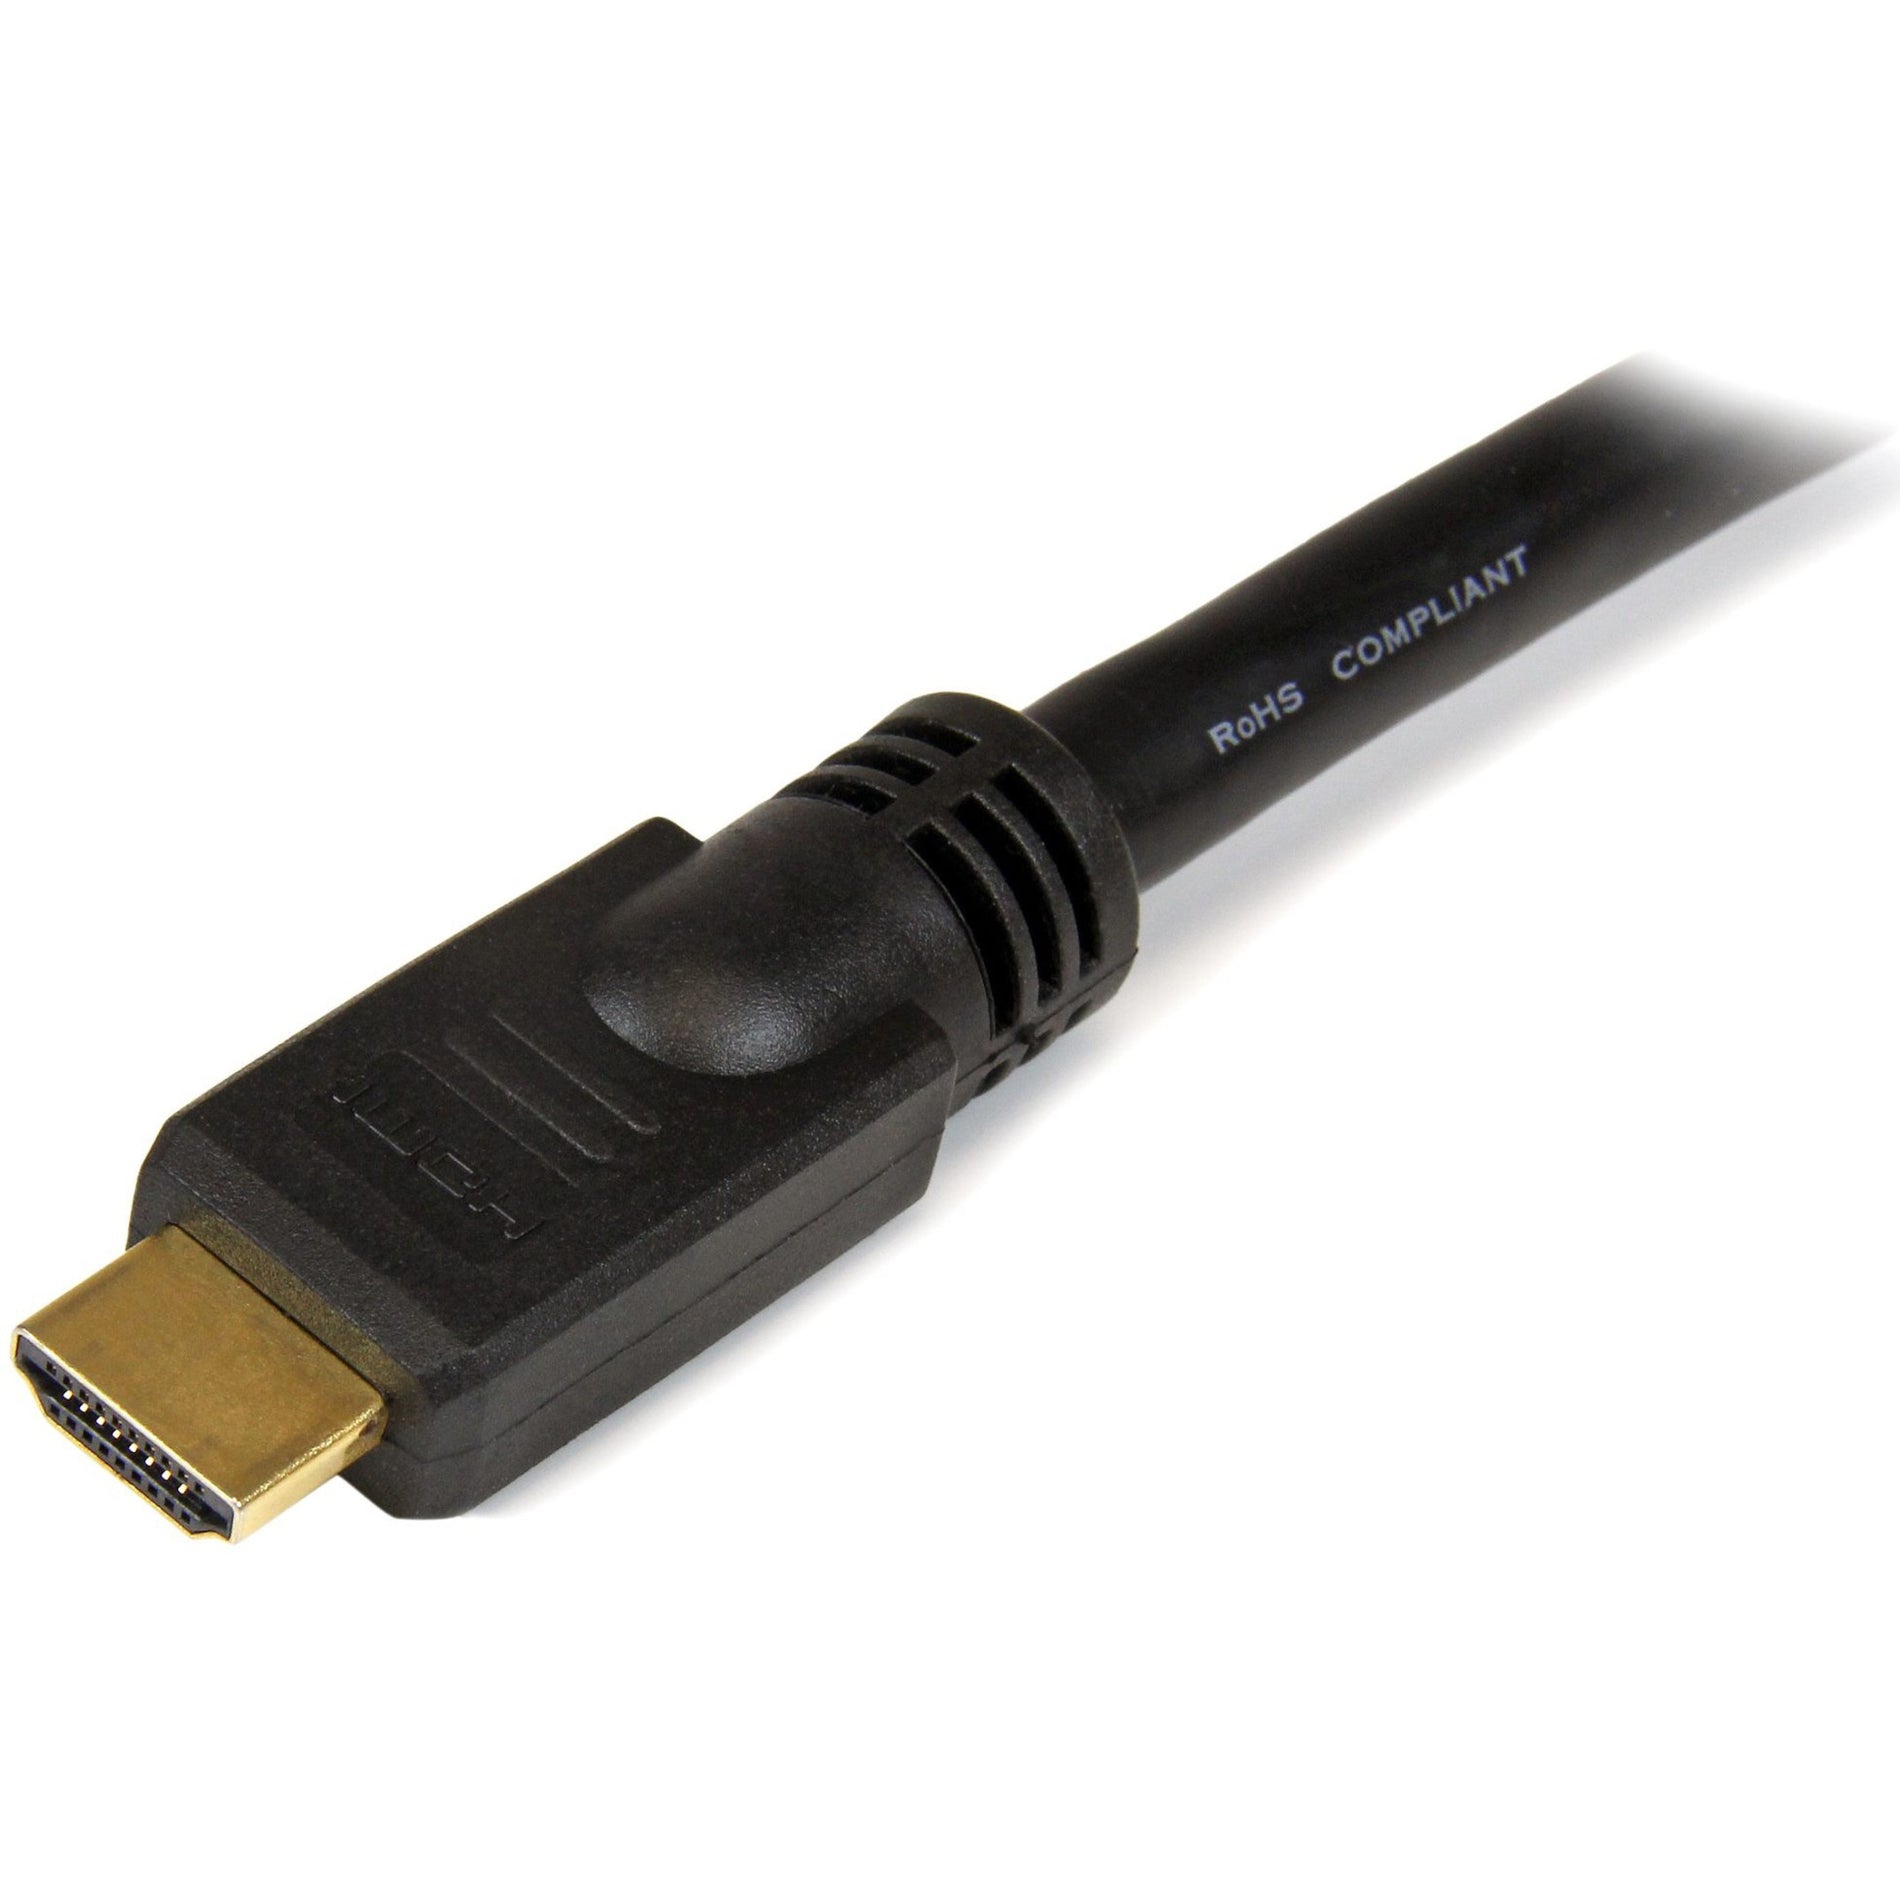 StarTech.com HDMM25 25 ft High Speed HDMI Cable - Ultra HD 4k x 2k HDMI Cable, Molded, Corrosion-free, Strain Relief, Gold Plated Connectors, Black